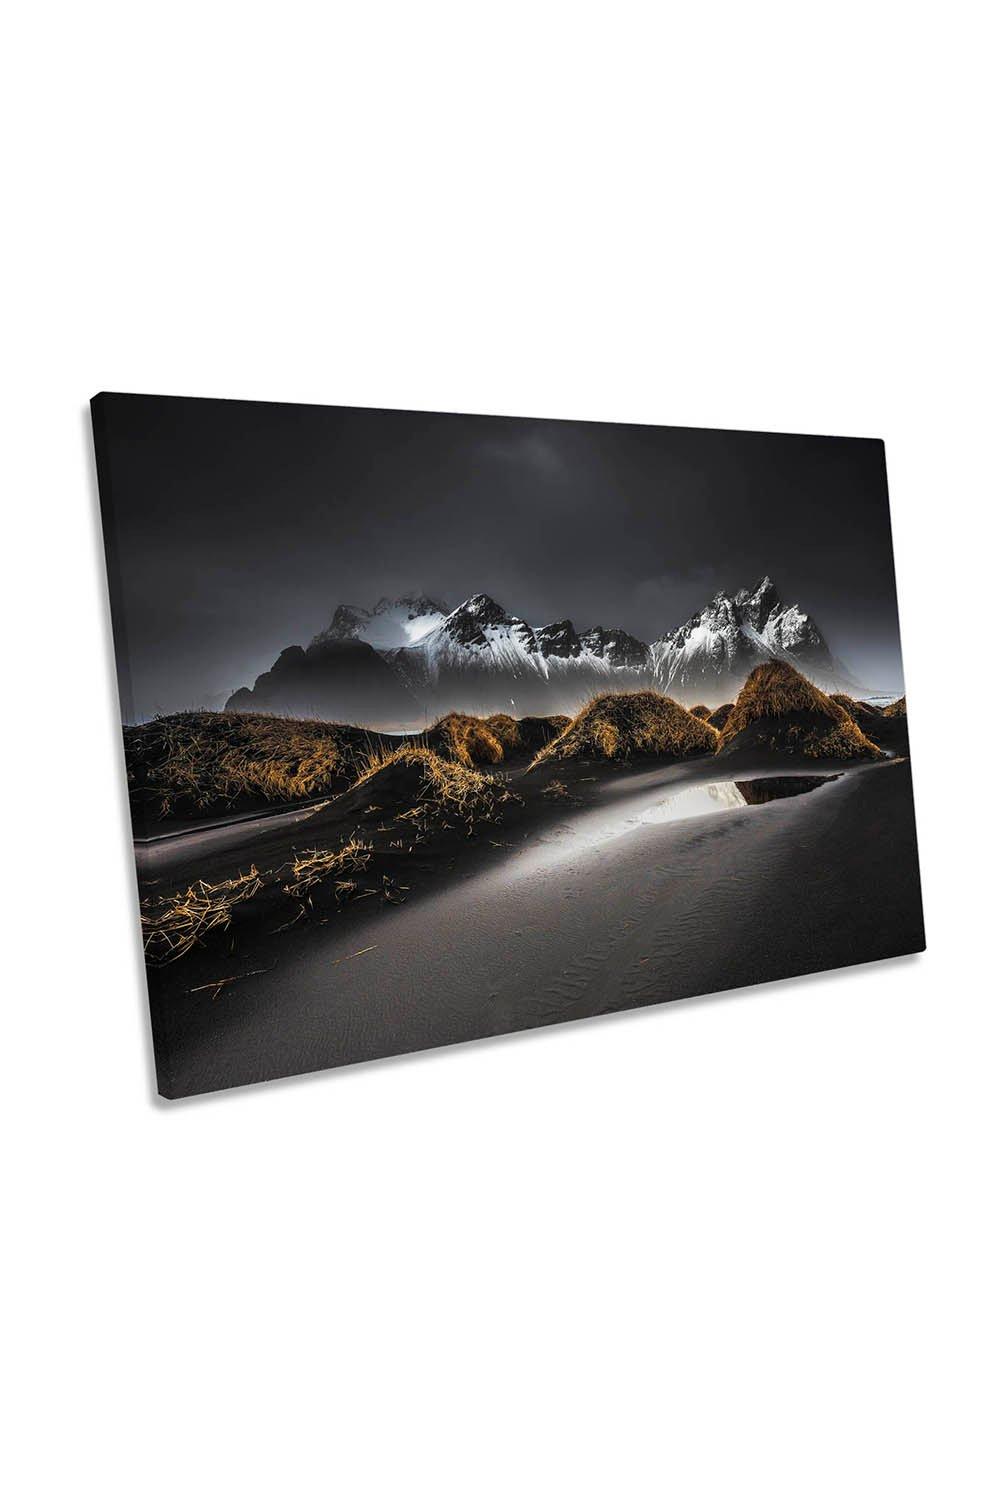 Stokksnes Iceland Mountains Landscape Canvas Wall Art Picture Print